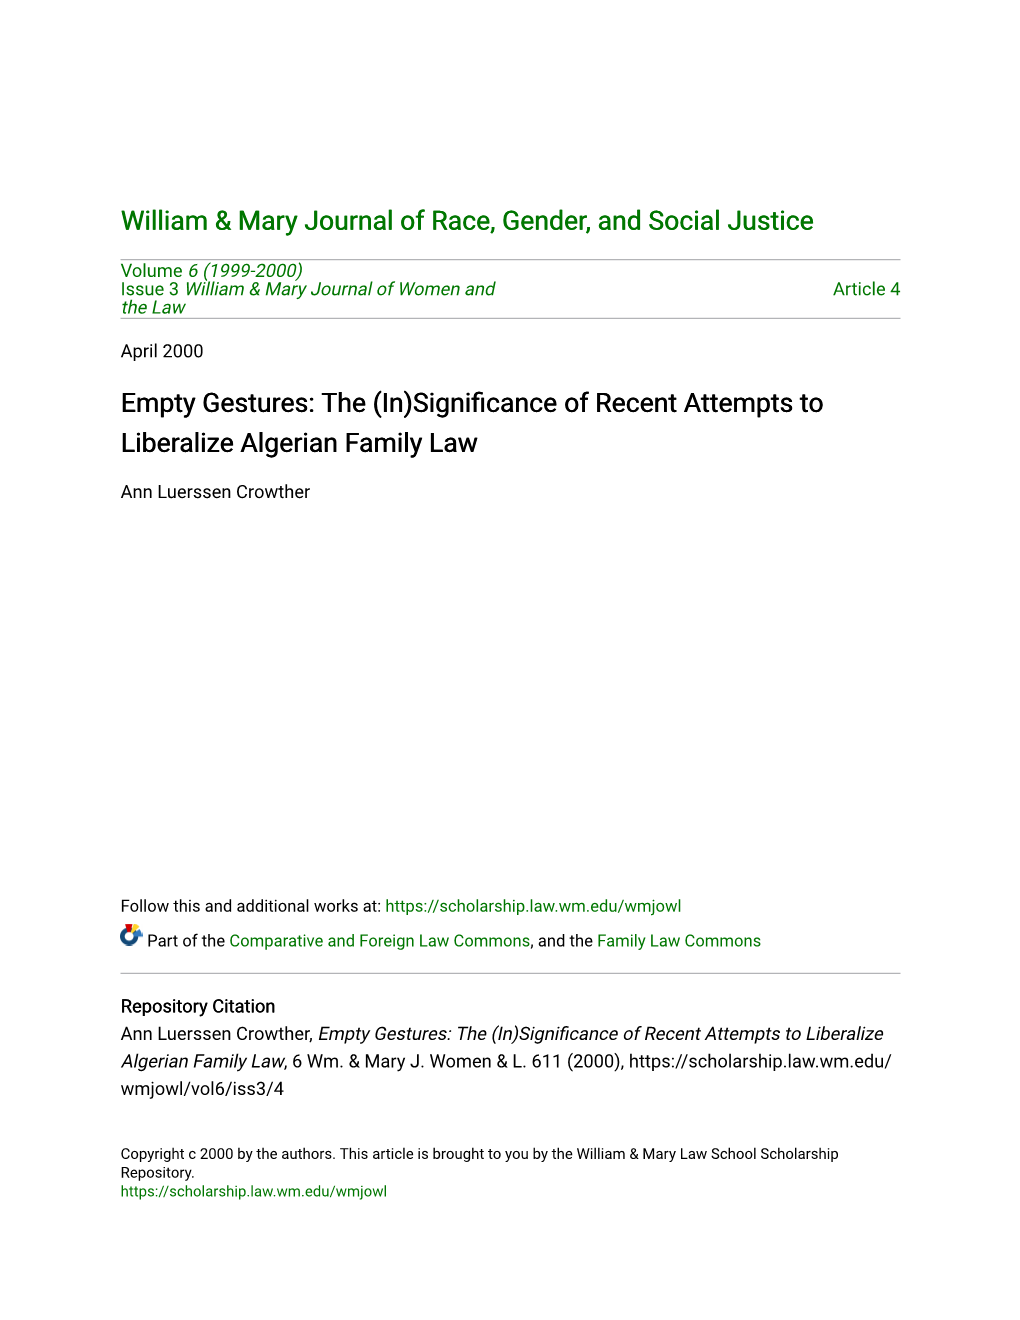 Empty Gestures: the (In)Significance of Recent Ttemptsa to Liberalize Algerian Family Law